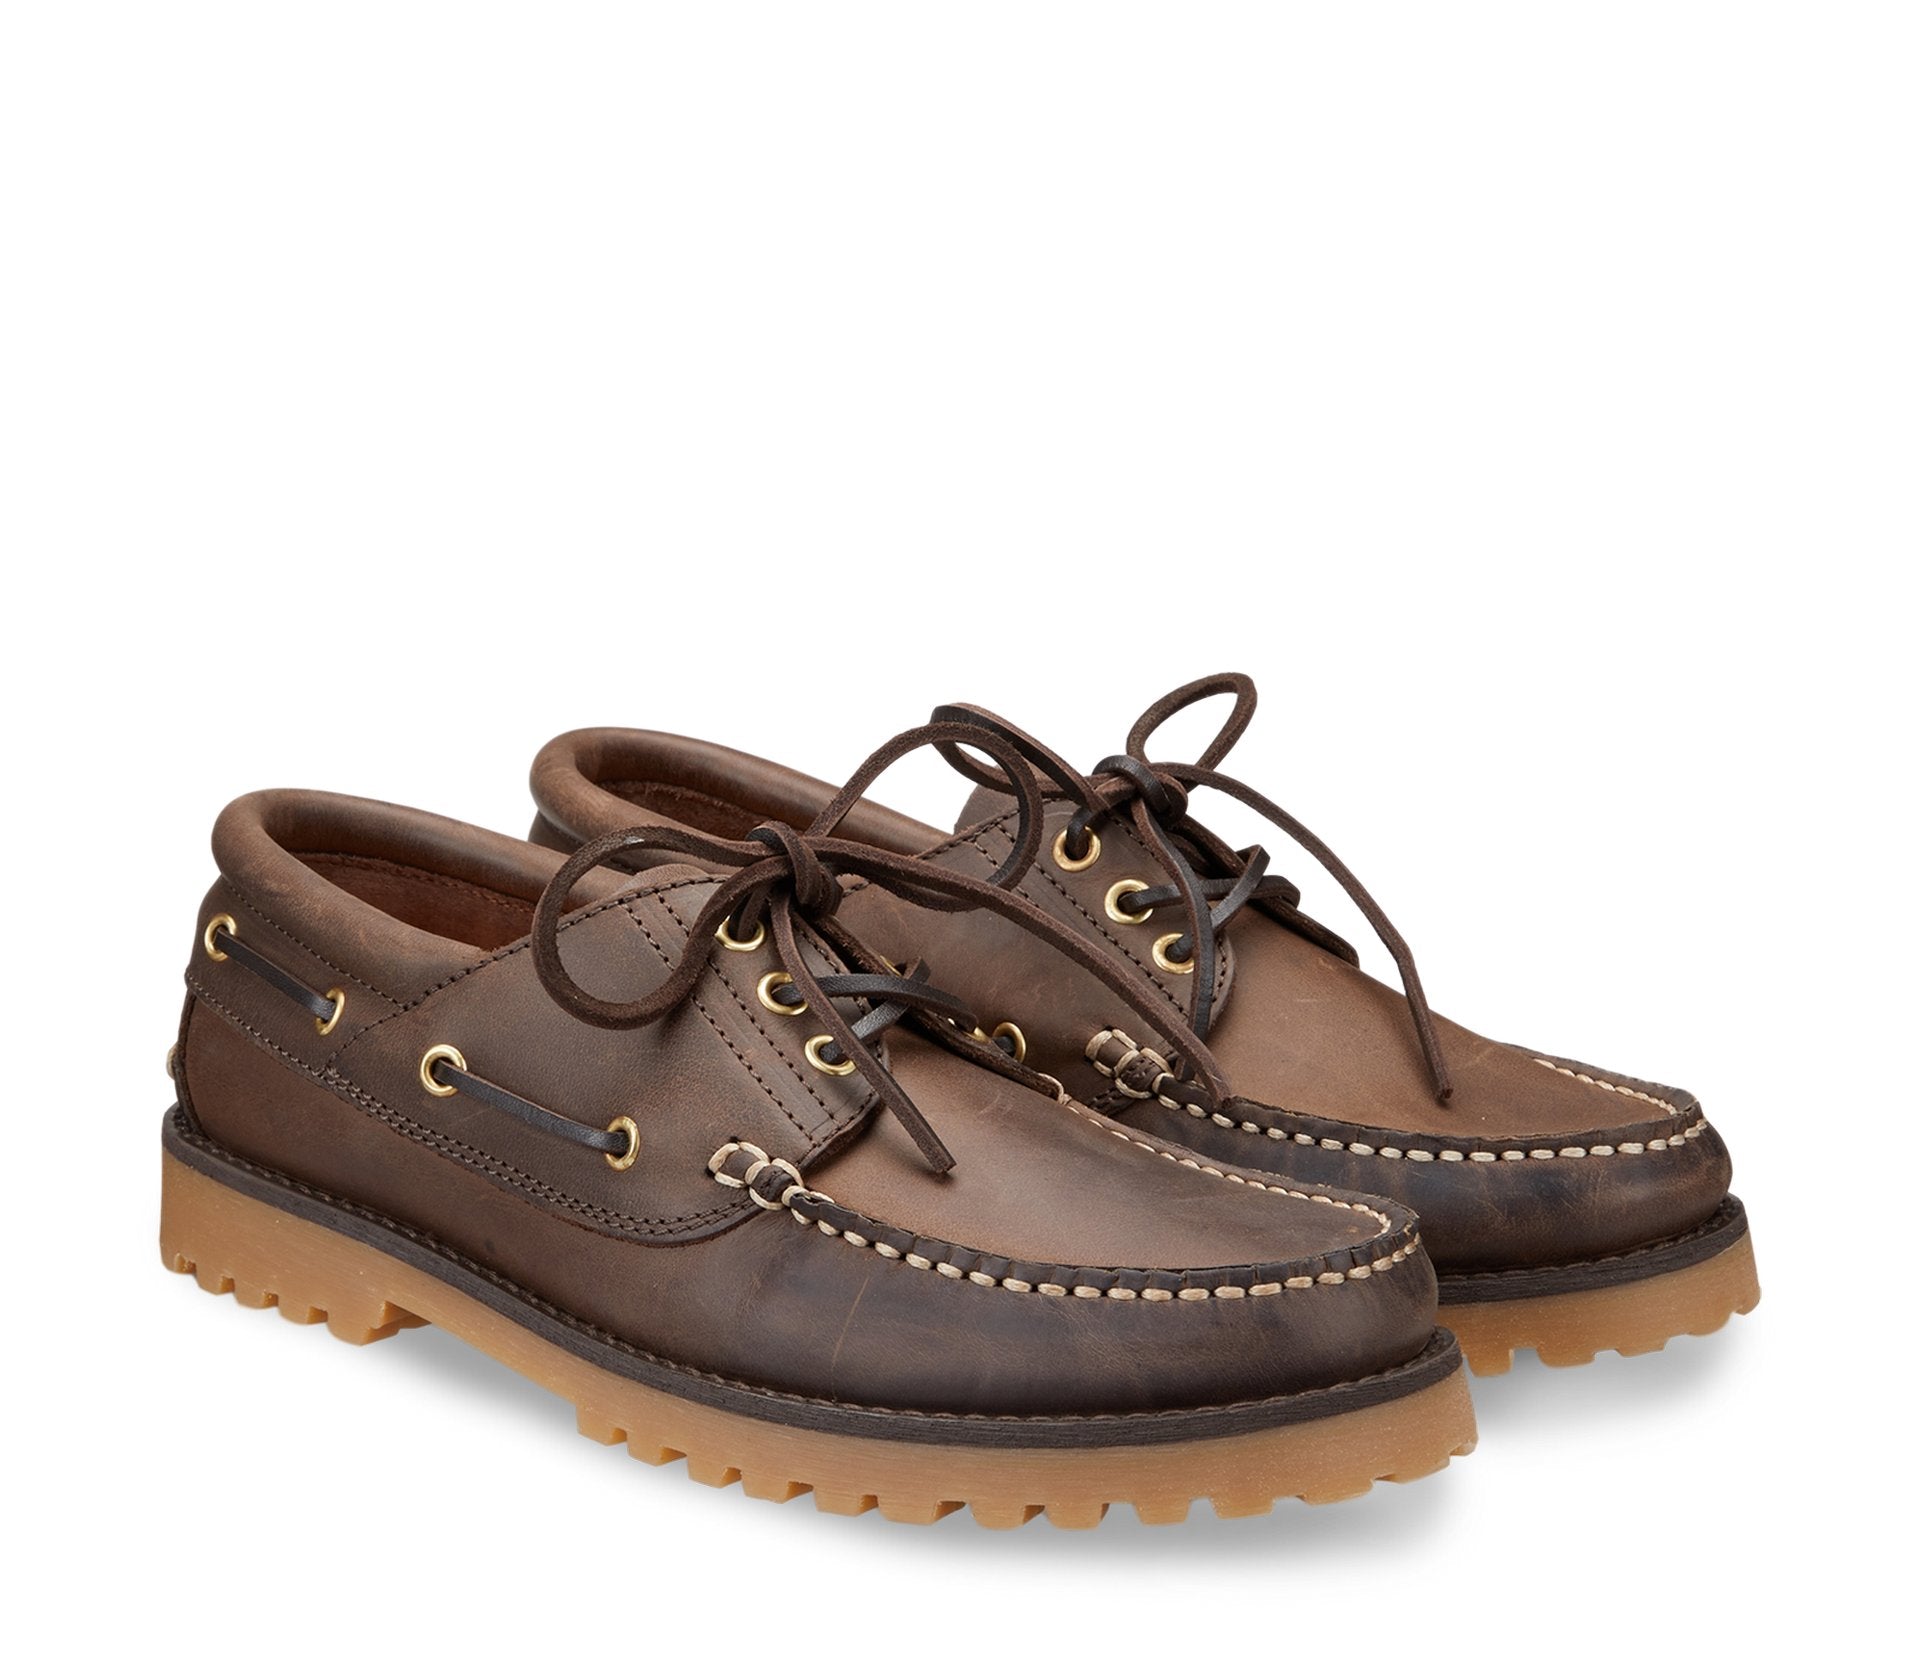 Docksteps leather boat shoes with laces